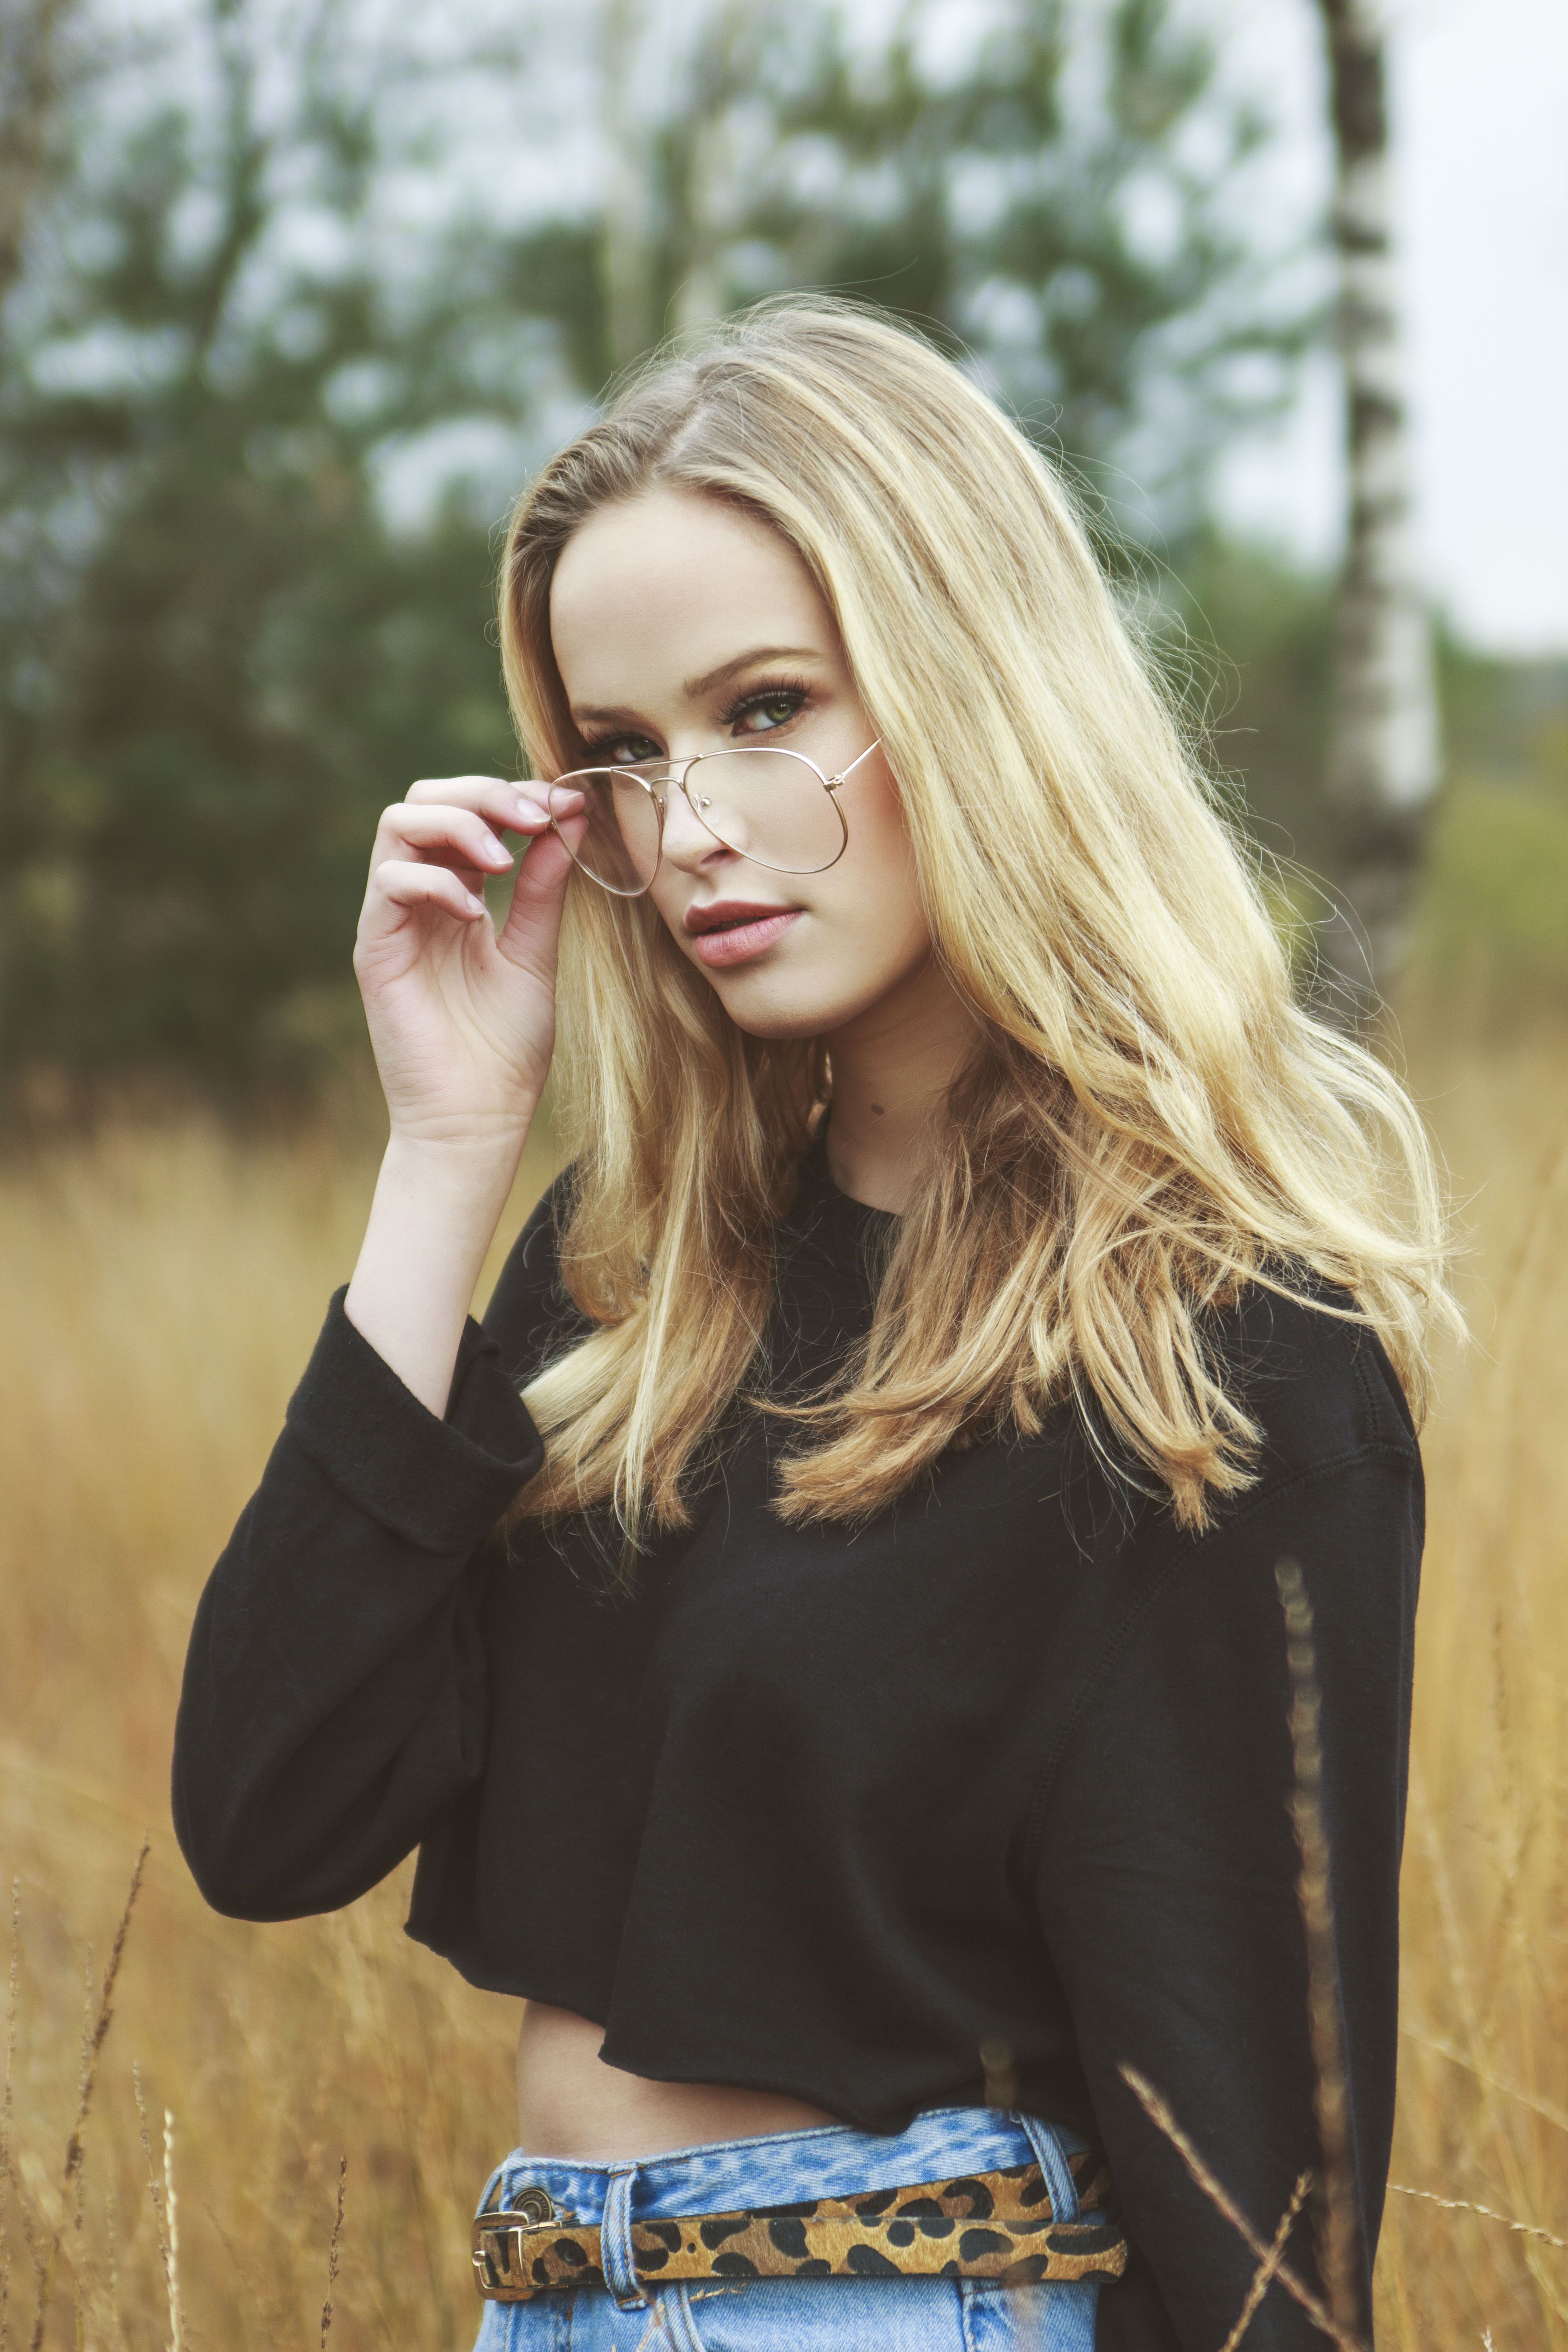 model, outdoor, photoshoot, photography, girl, blonde, look, fashion ...